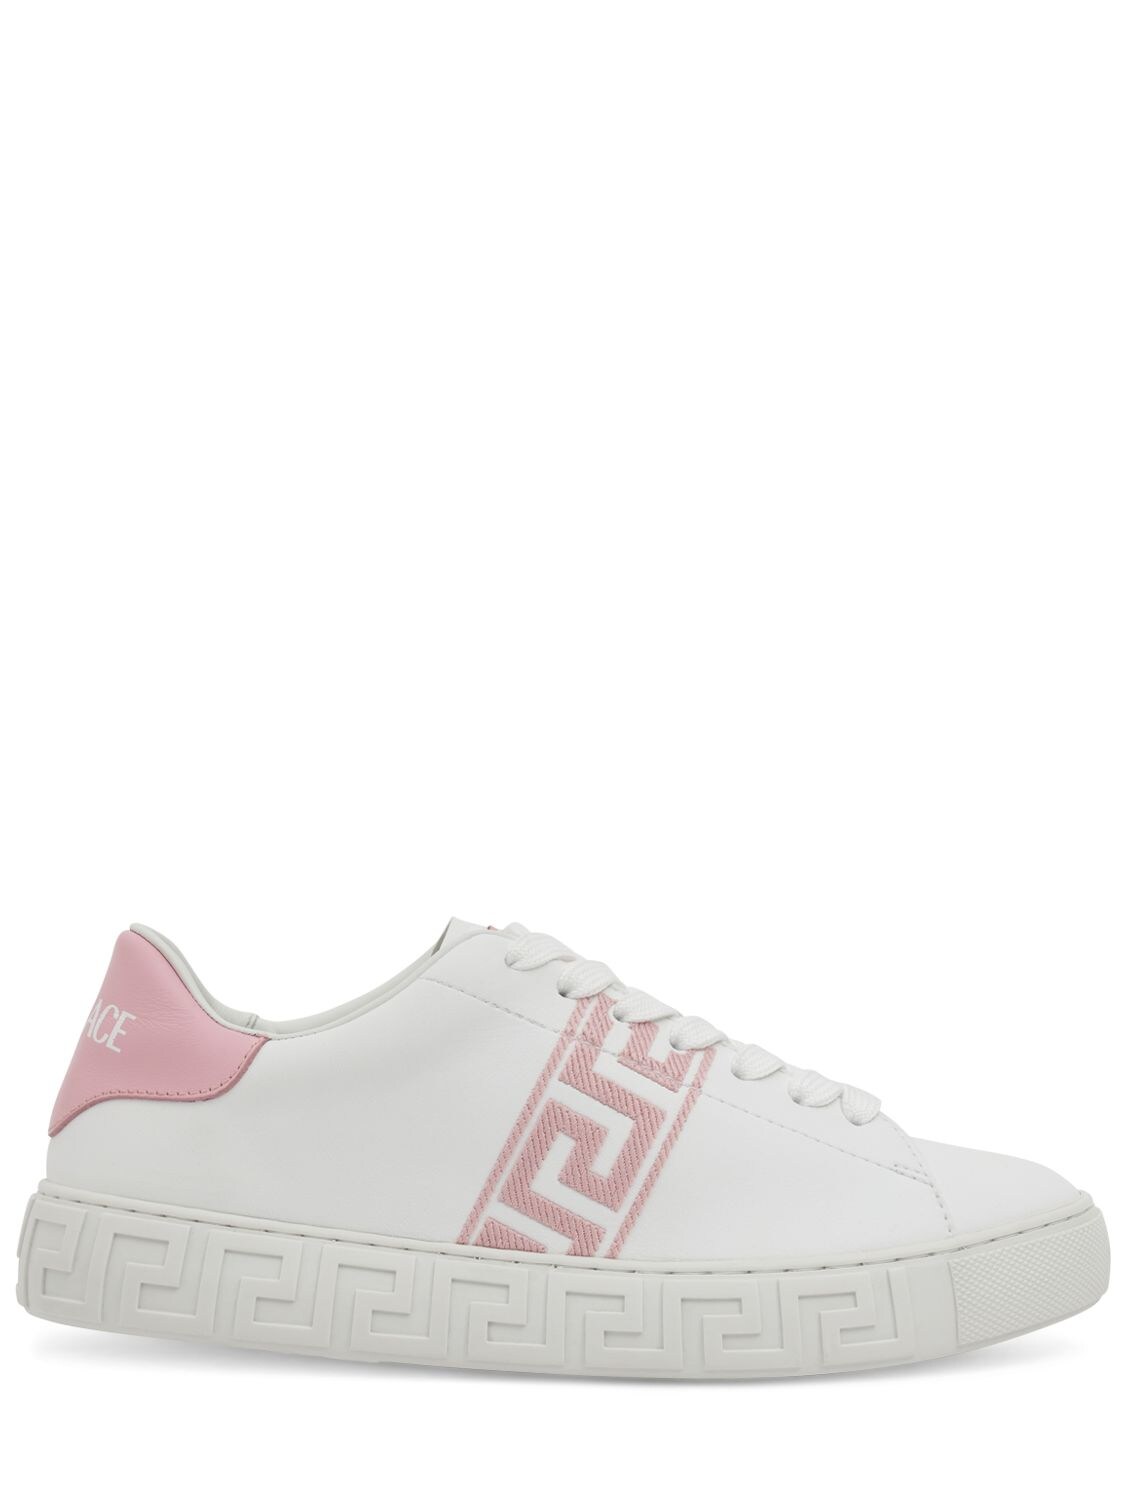 Image of Embroidered Faux Leather Sneakers